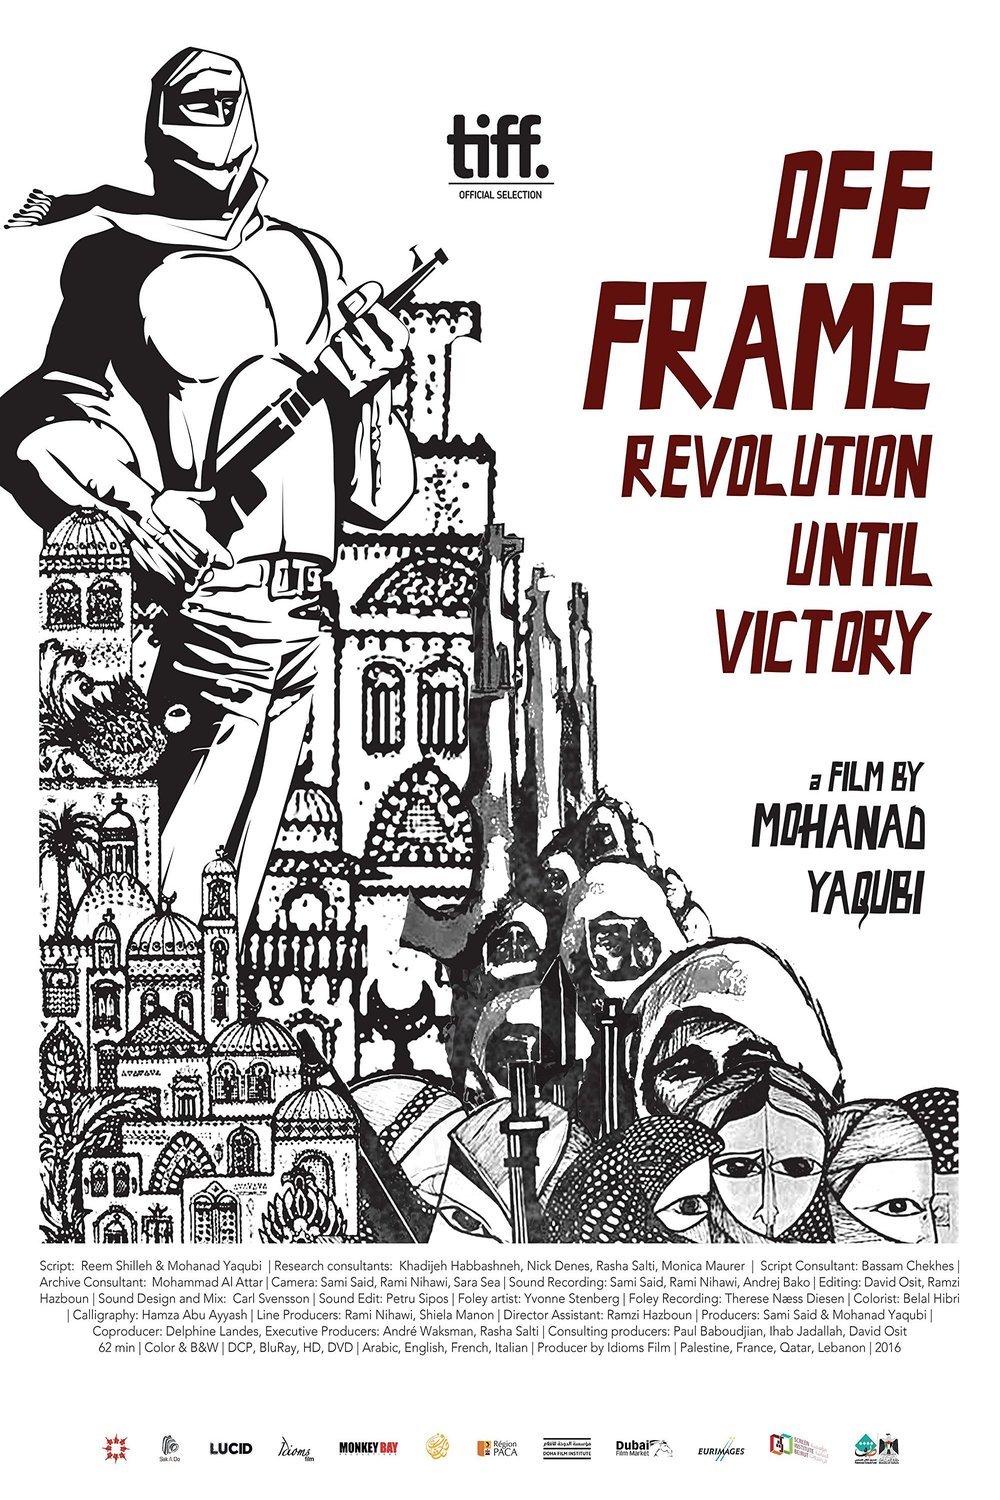 Poster of the movie Off Frame AKA Revolution Until Victory